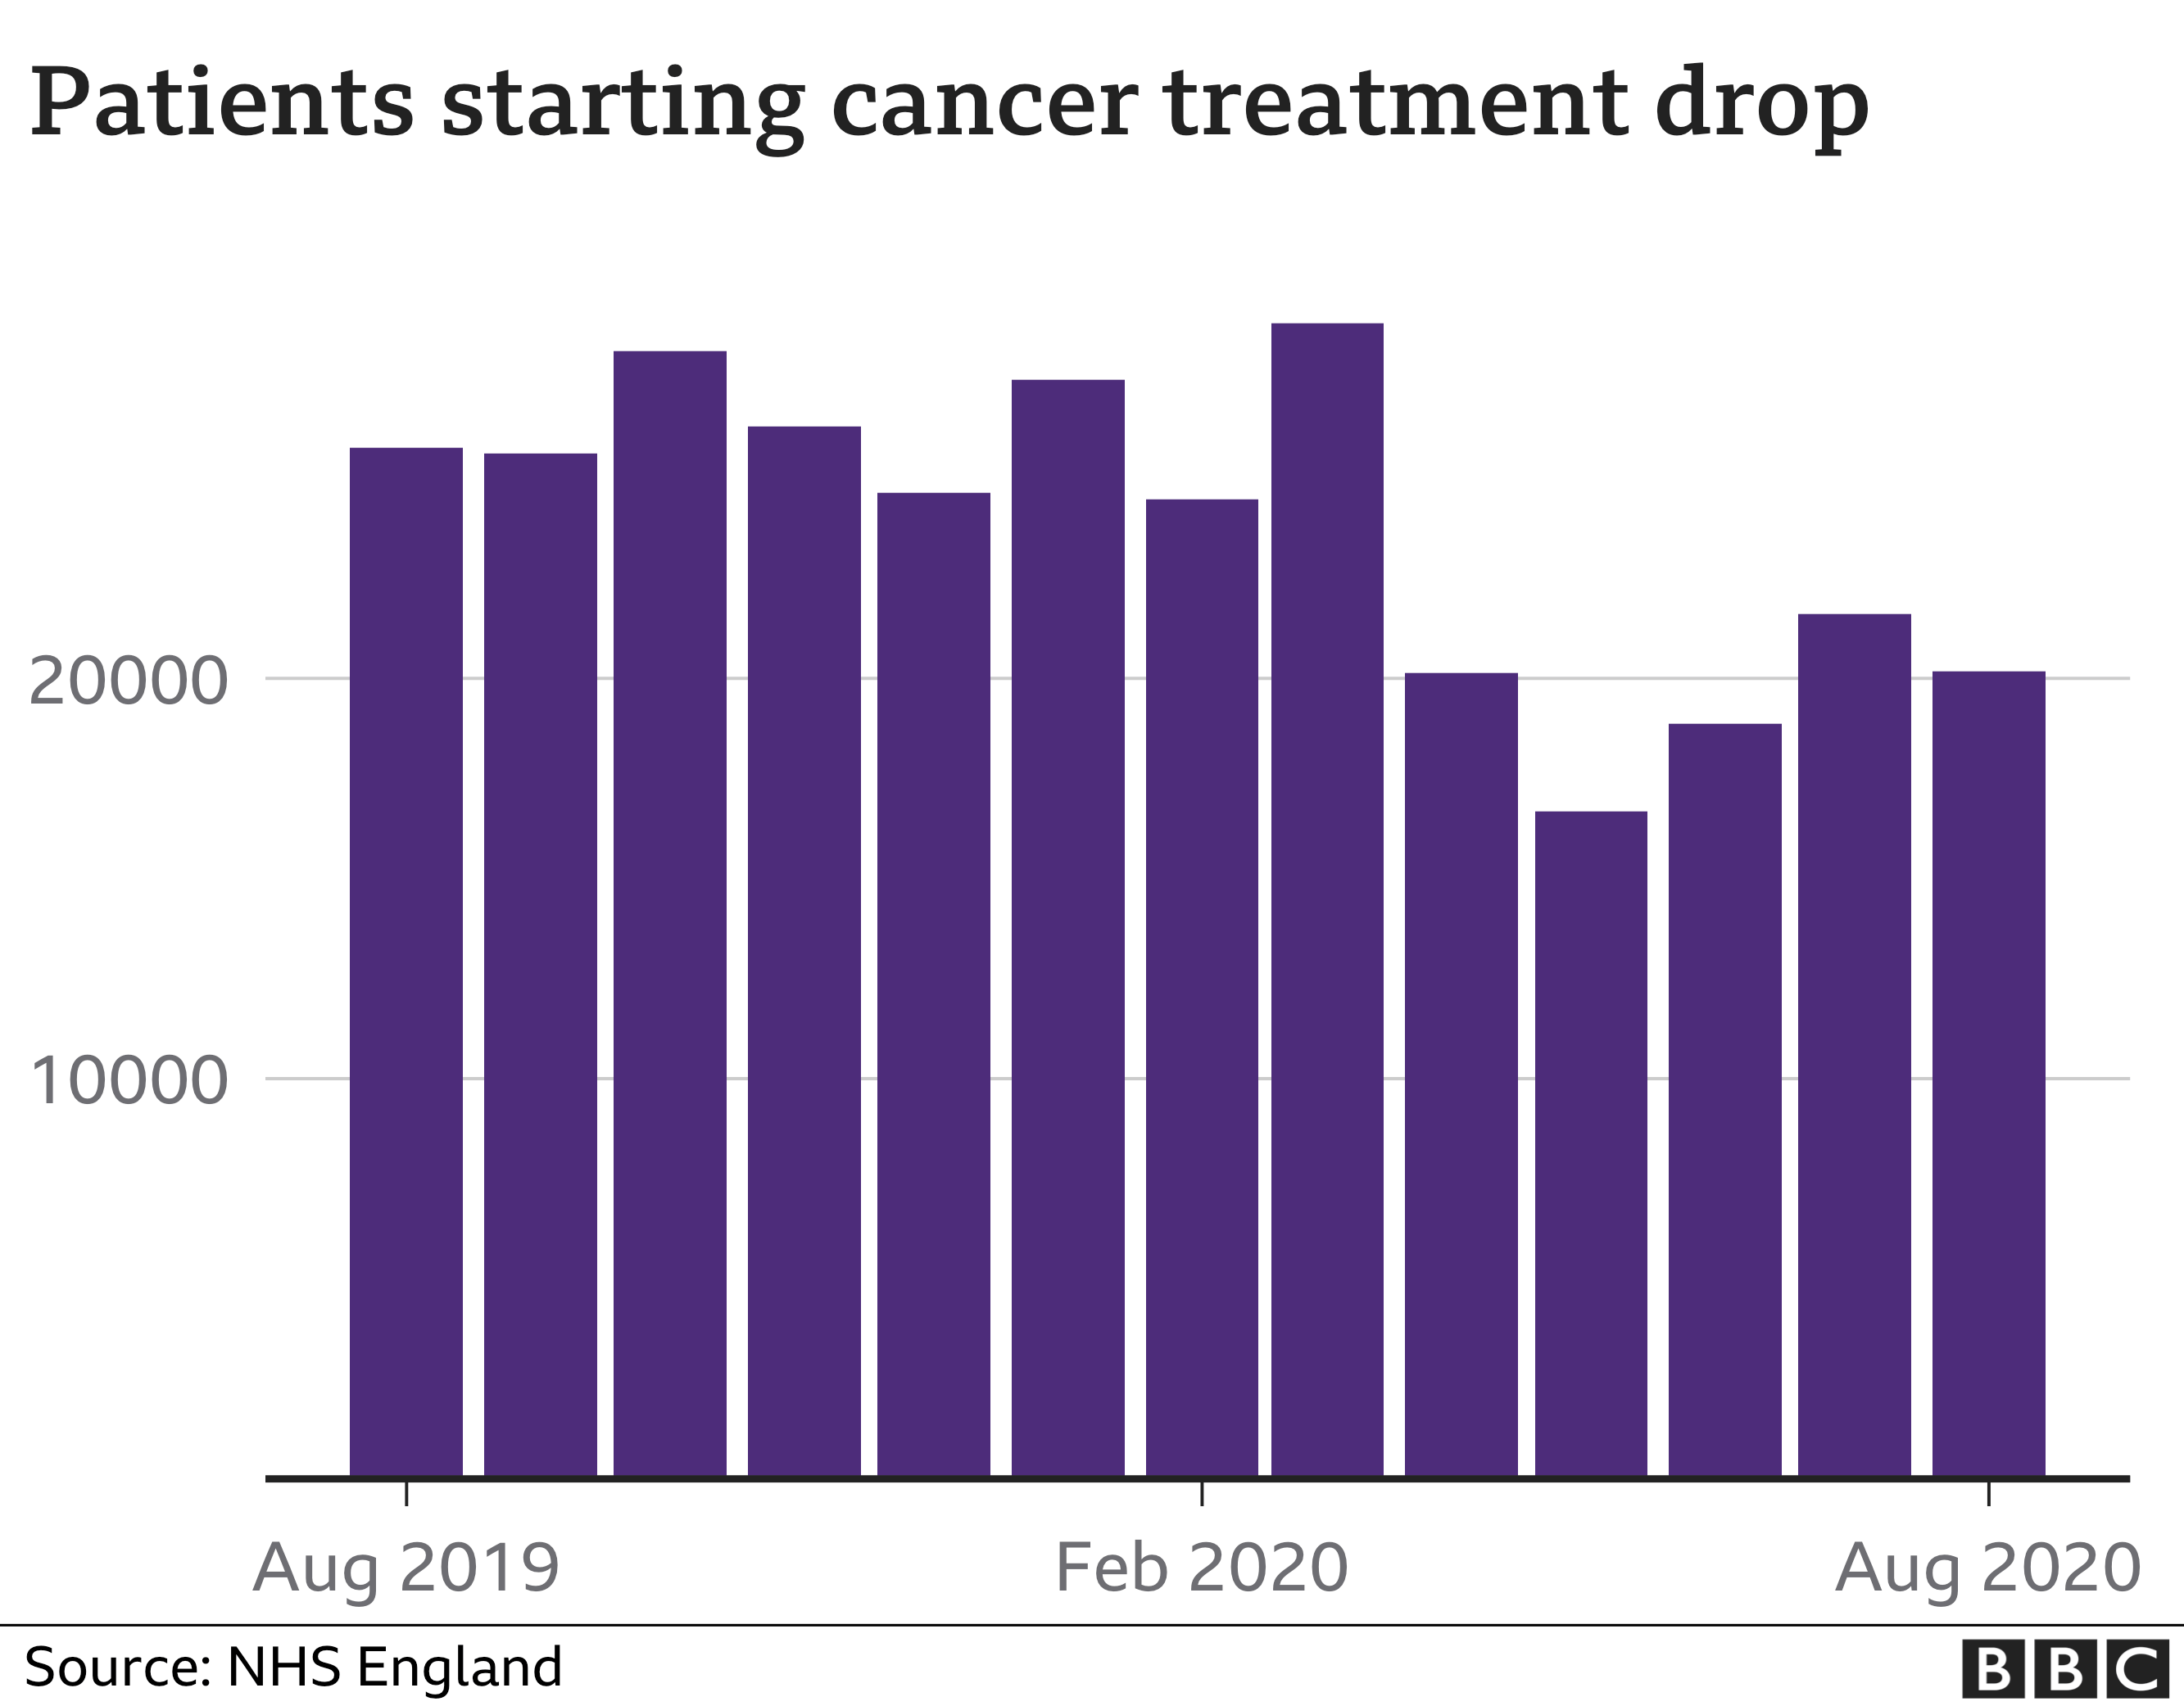 Drop in patients starting cancer treatment